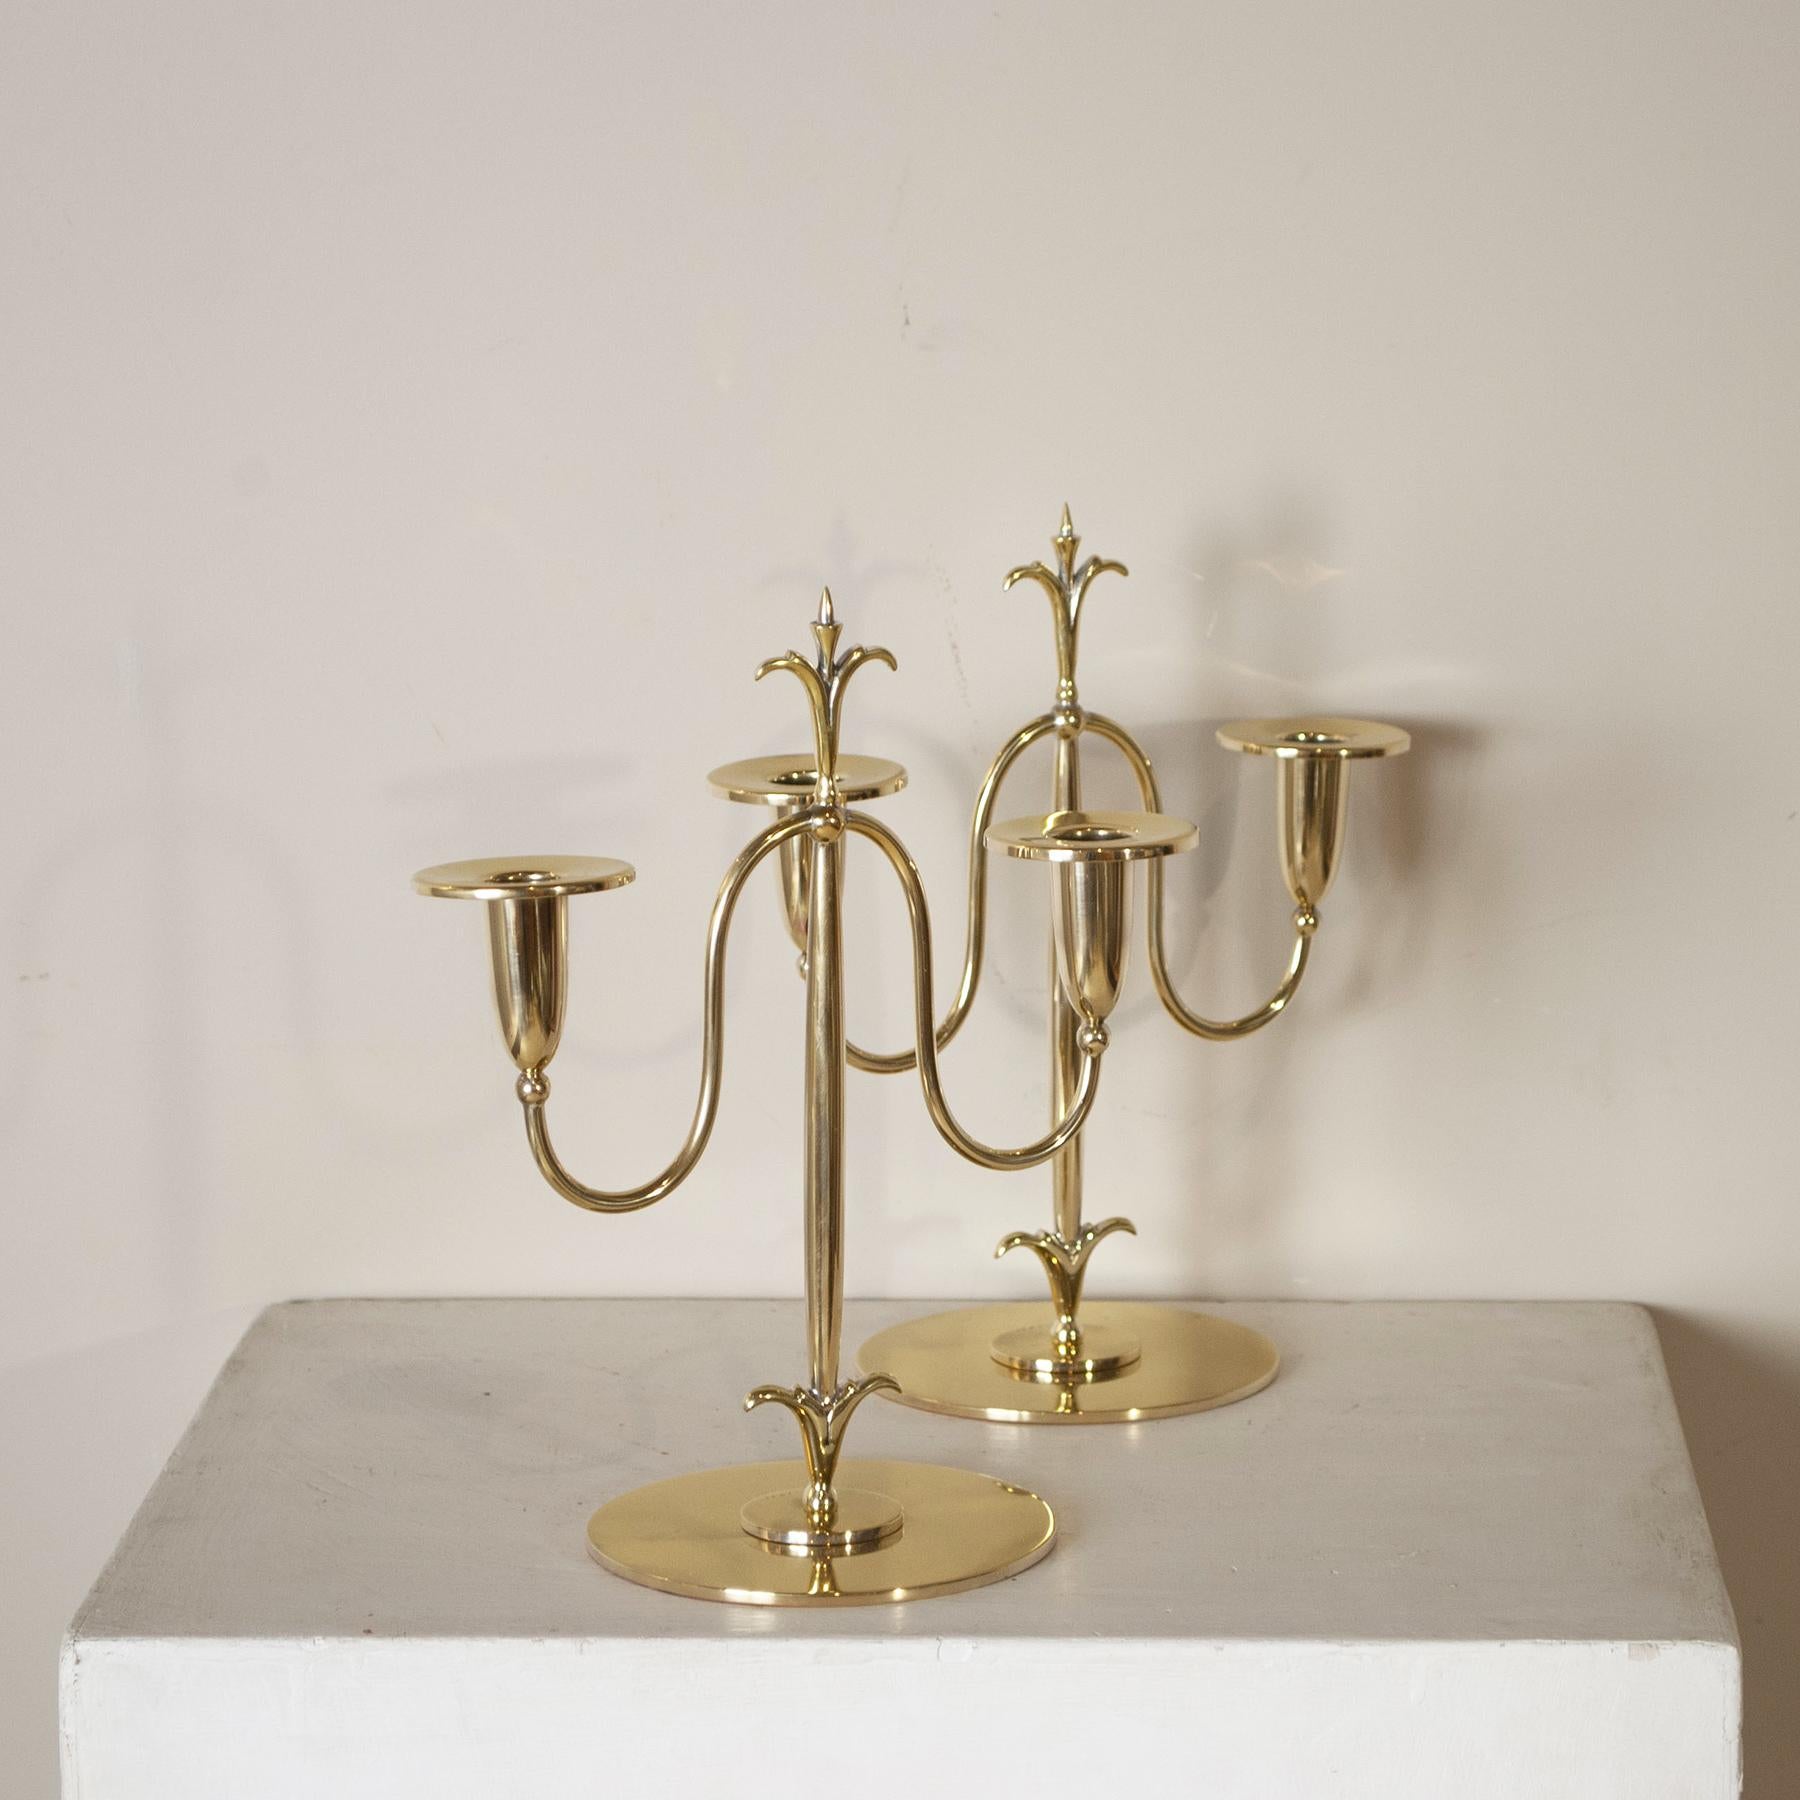 Gunner Ander Brass Candlesticks 1960s In Good Condition For Sale In bari, IT